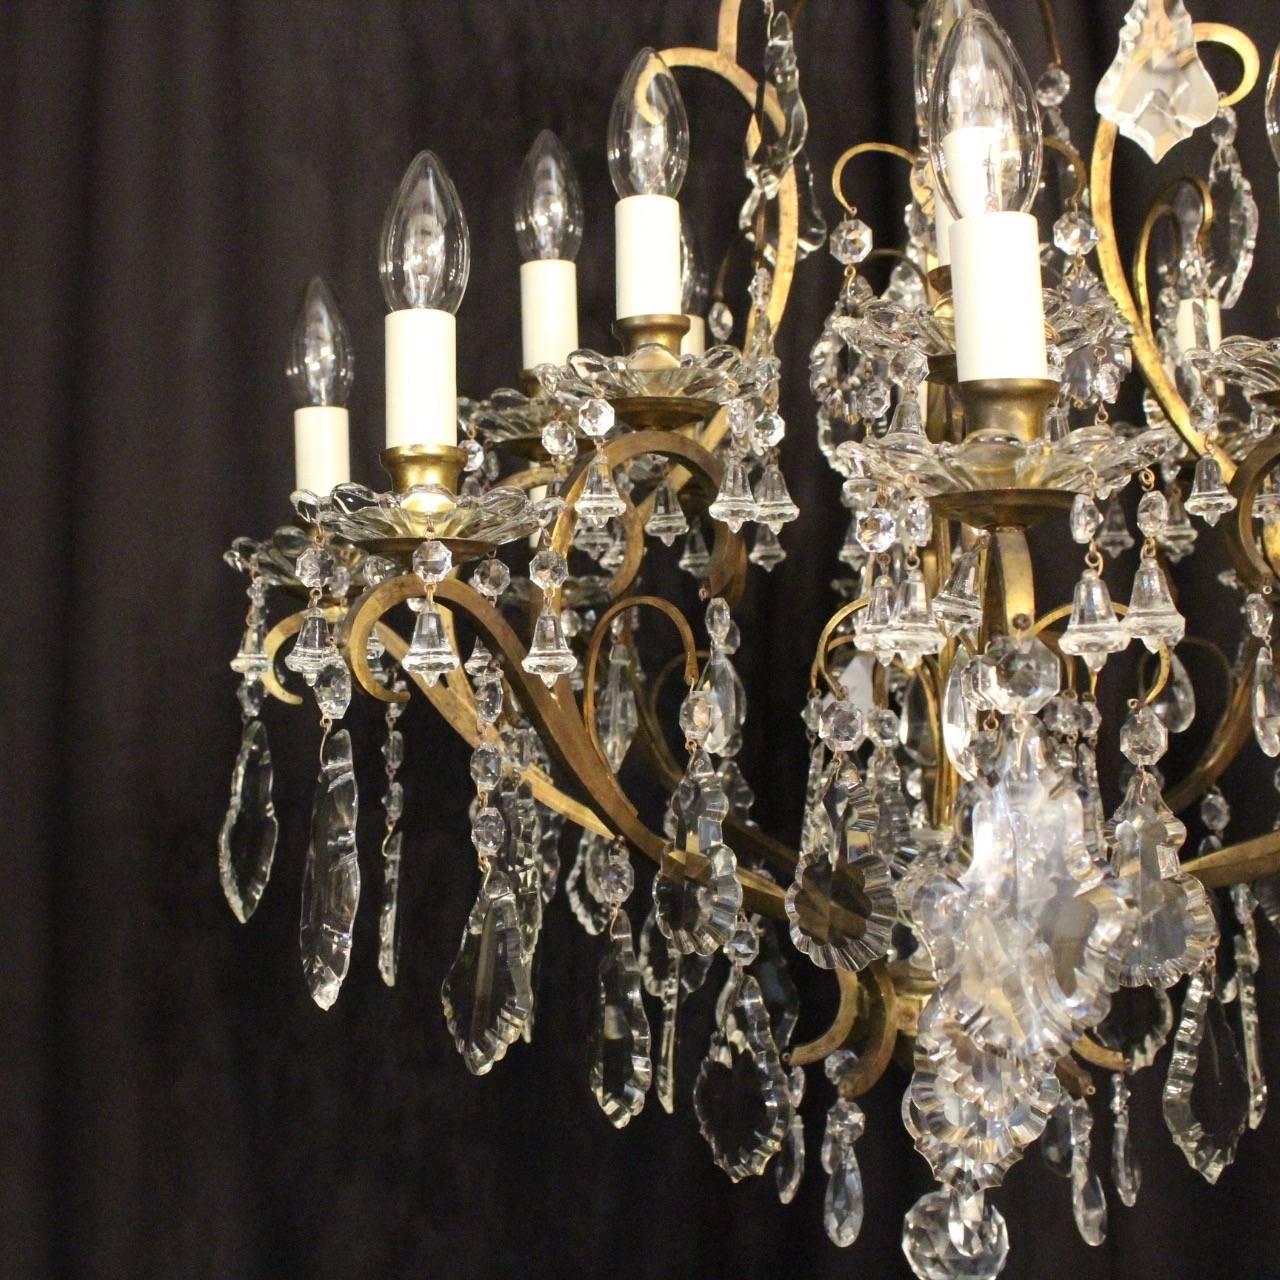 A large French cast brass and crystal sixteen-light birdcage form antique chandelier, the square gauge scrolling arms with foliated glass bobeche drip pans and candle sconces, issuing from a cage form interior and ornate wirework canopy with glass